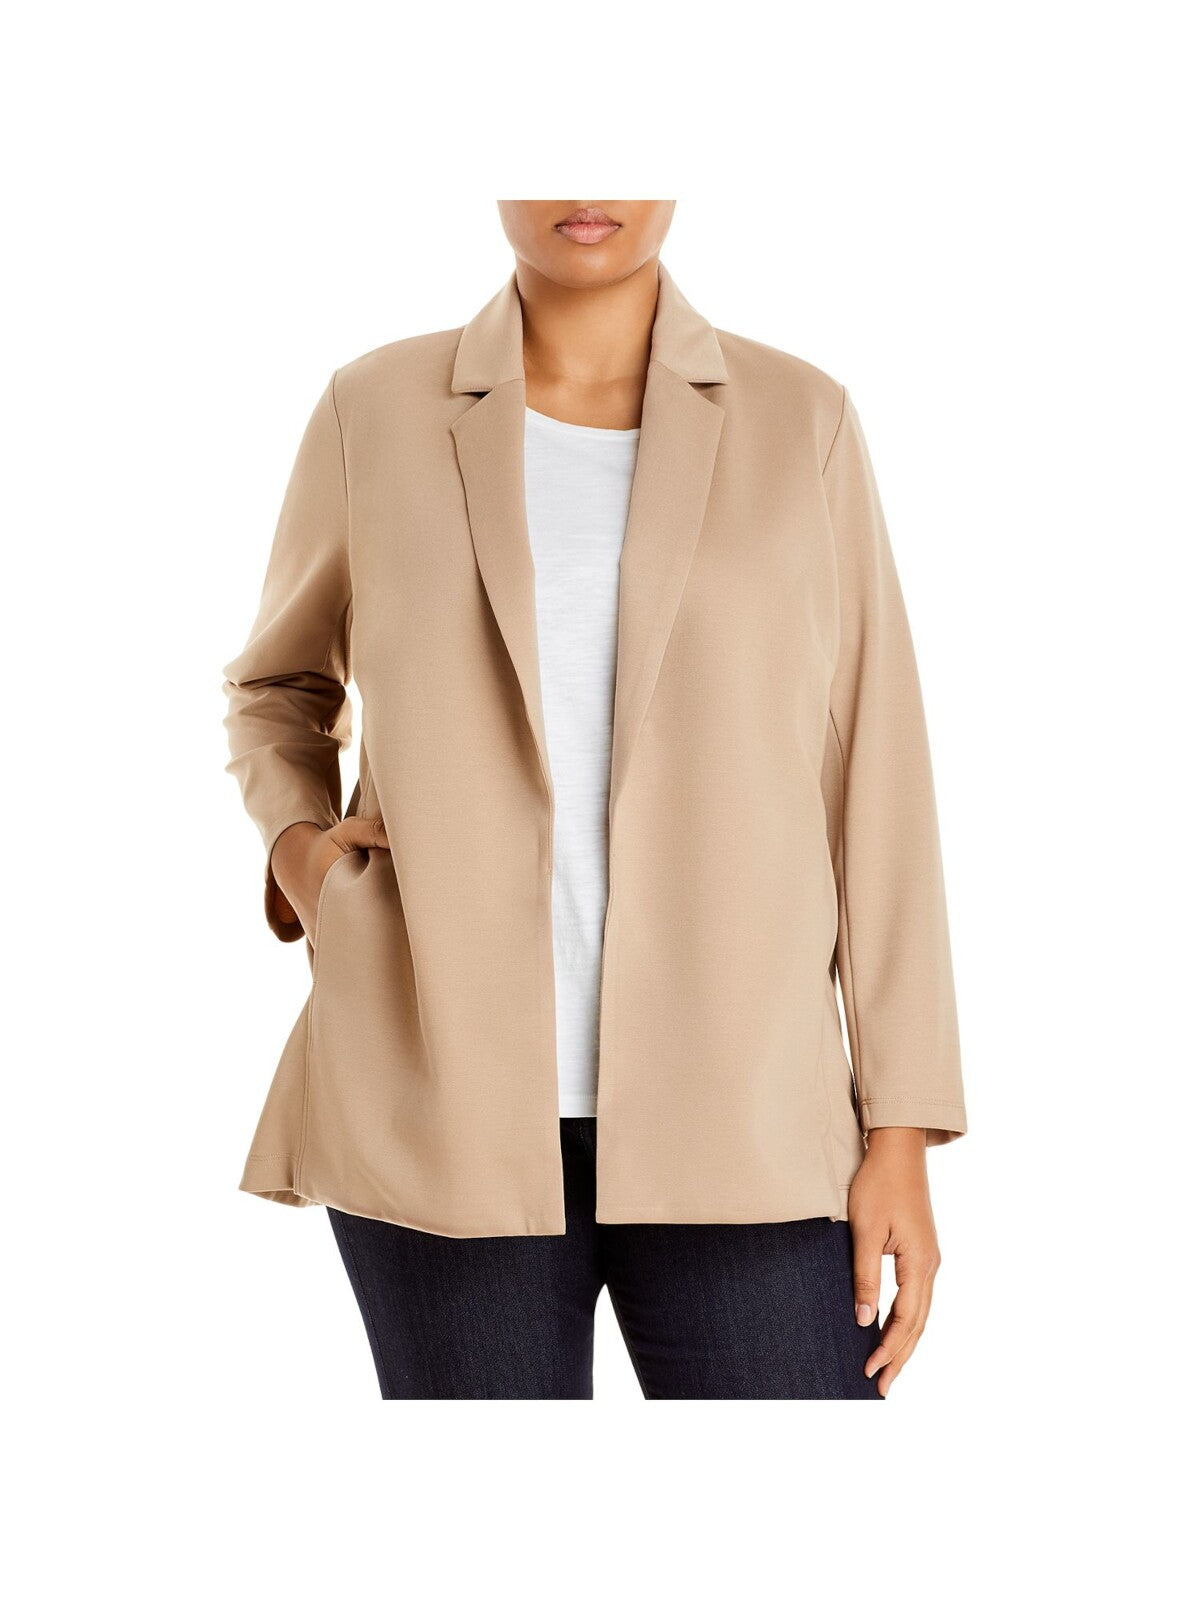 EILEEN FISHER Womens Beige Pocketed Notch Collar Back Vent Long Sleeve Wear To Work Jacket Plus 2X